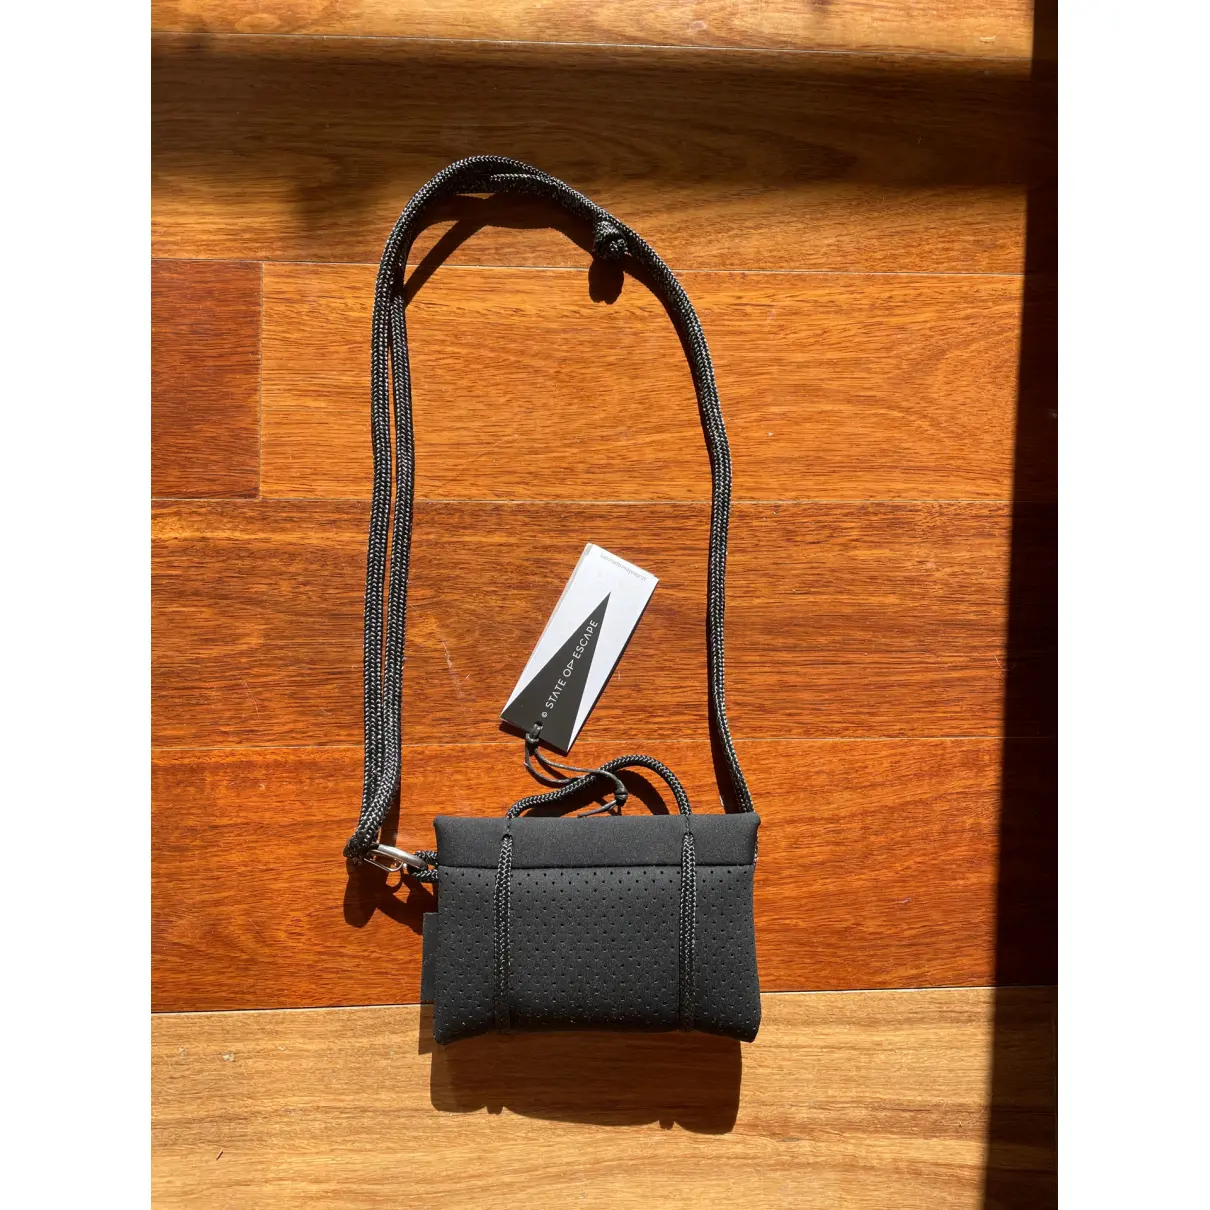 Buy State of Escape Crossbody bag online